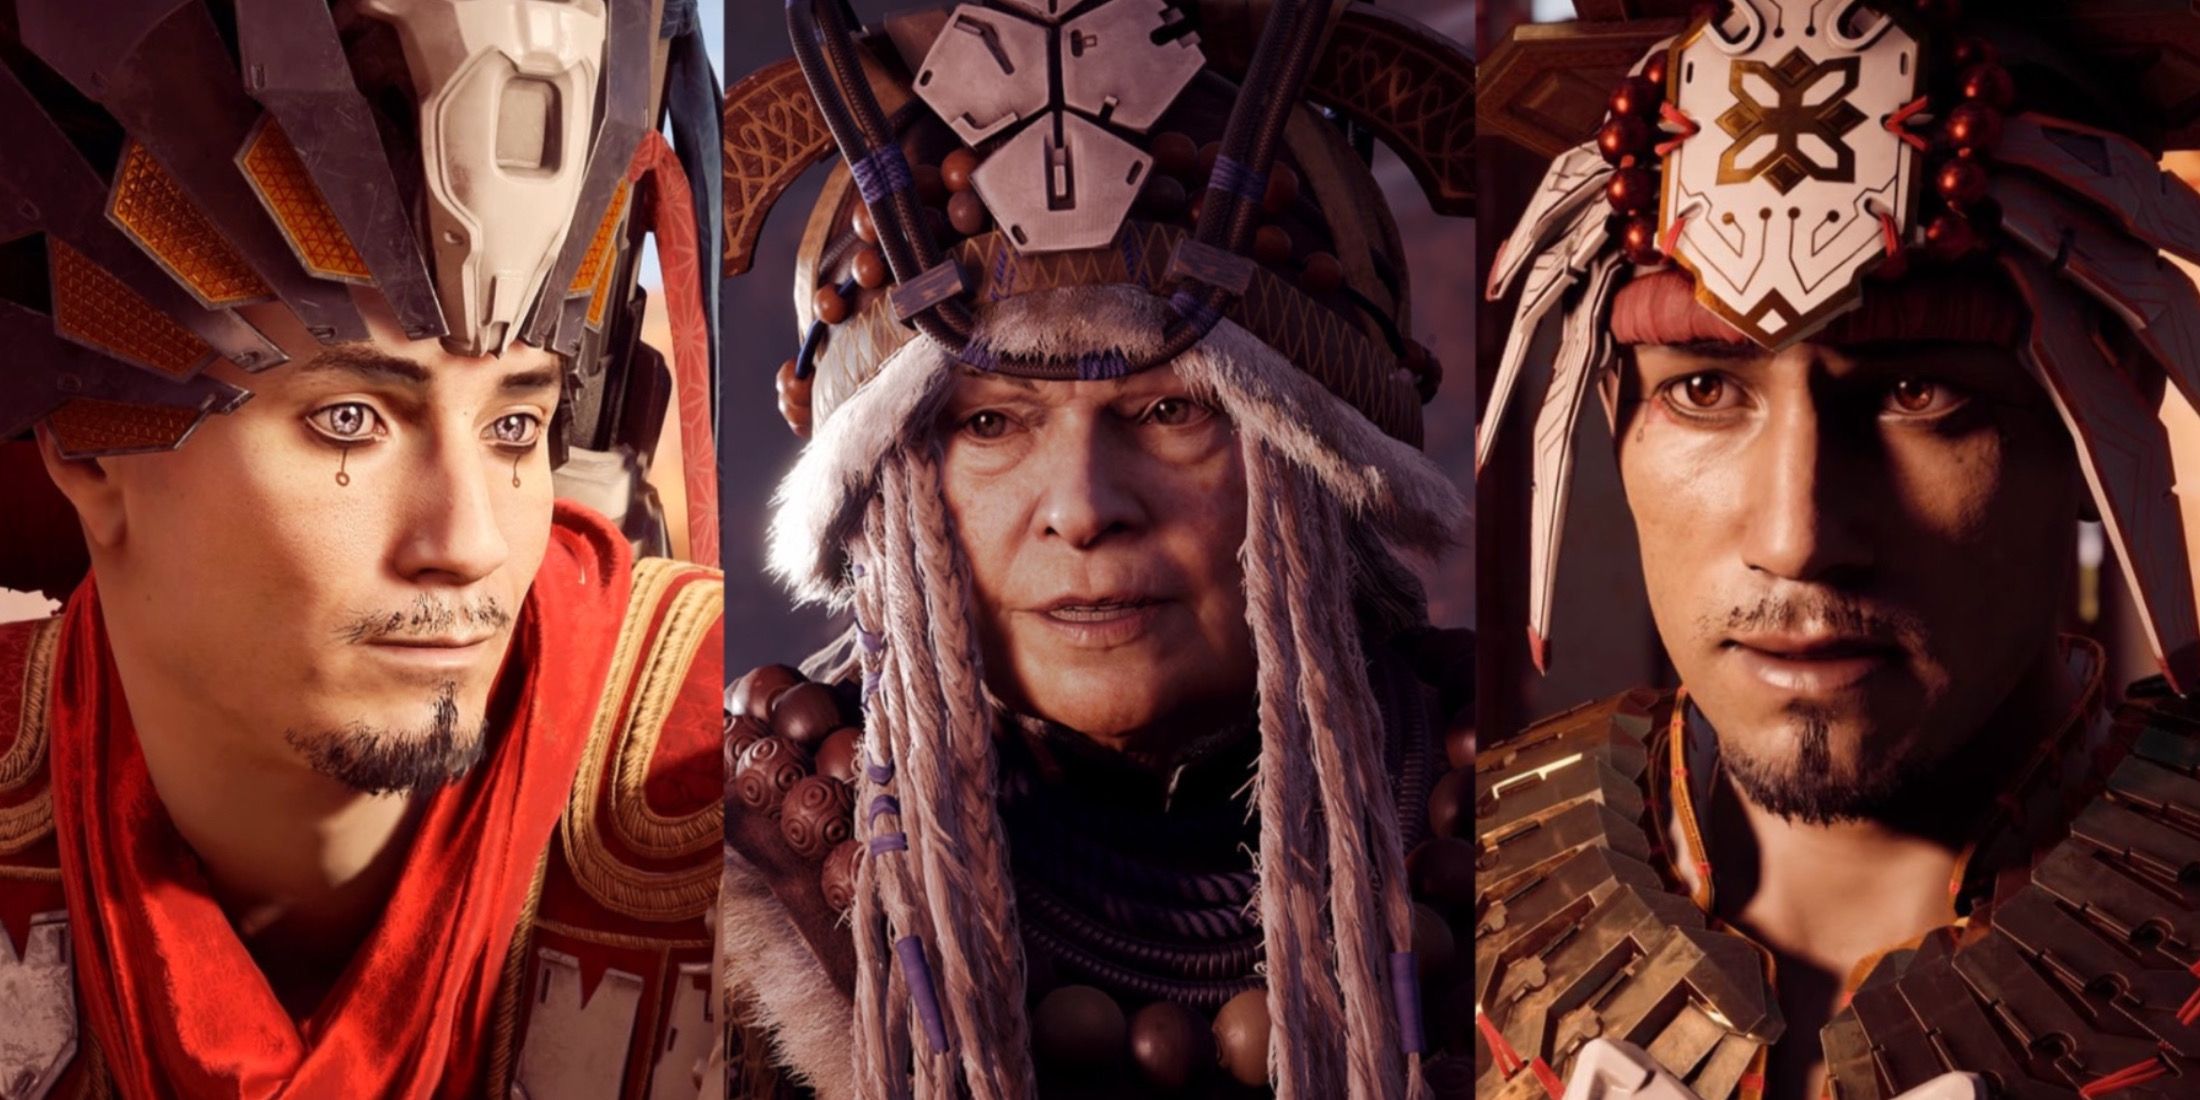 7 Characters From Horizon Zero Dawn That Should Appear in Horizon 3